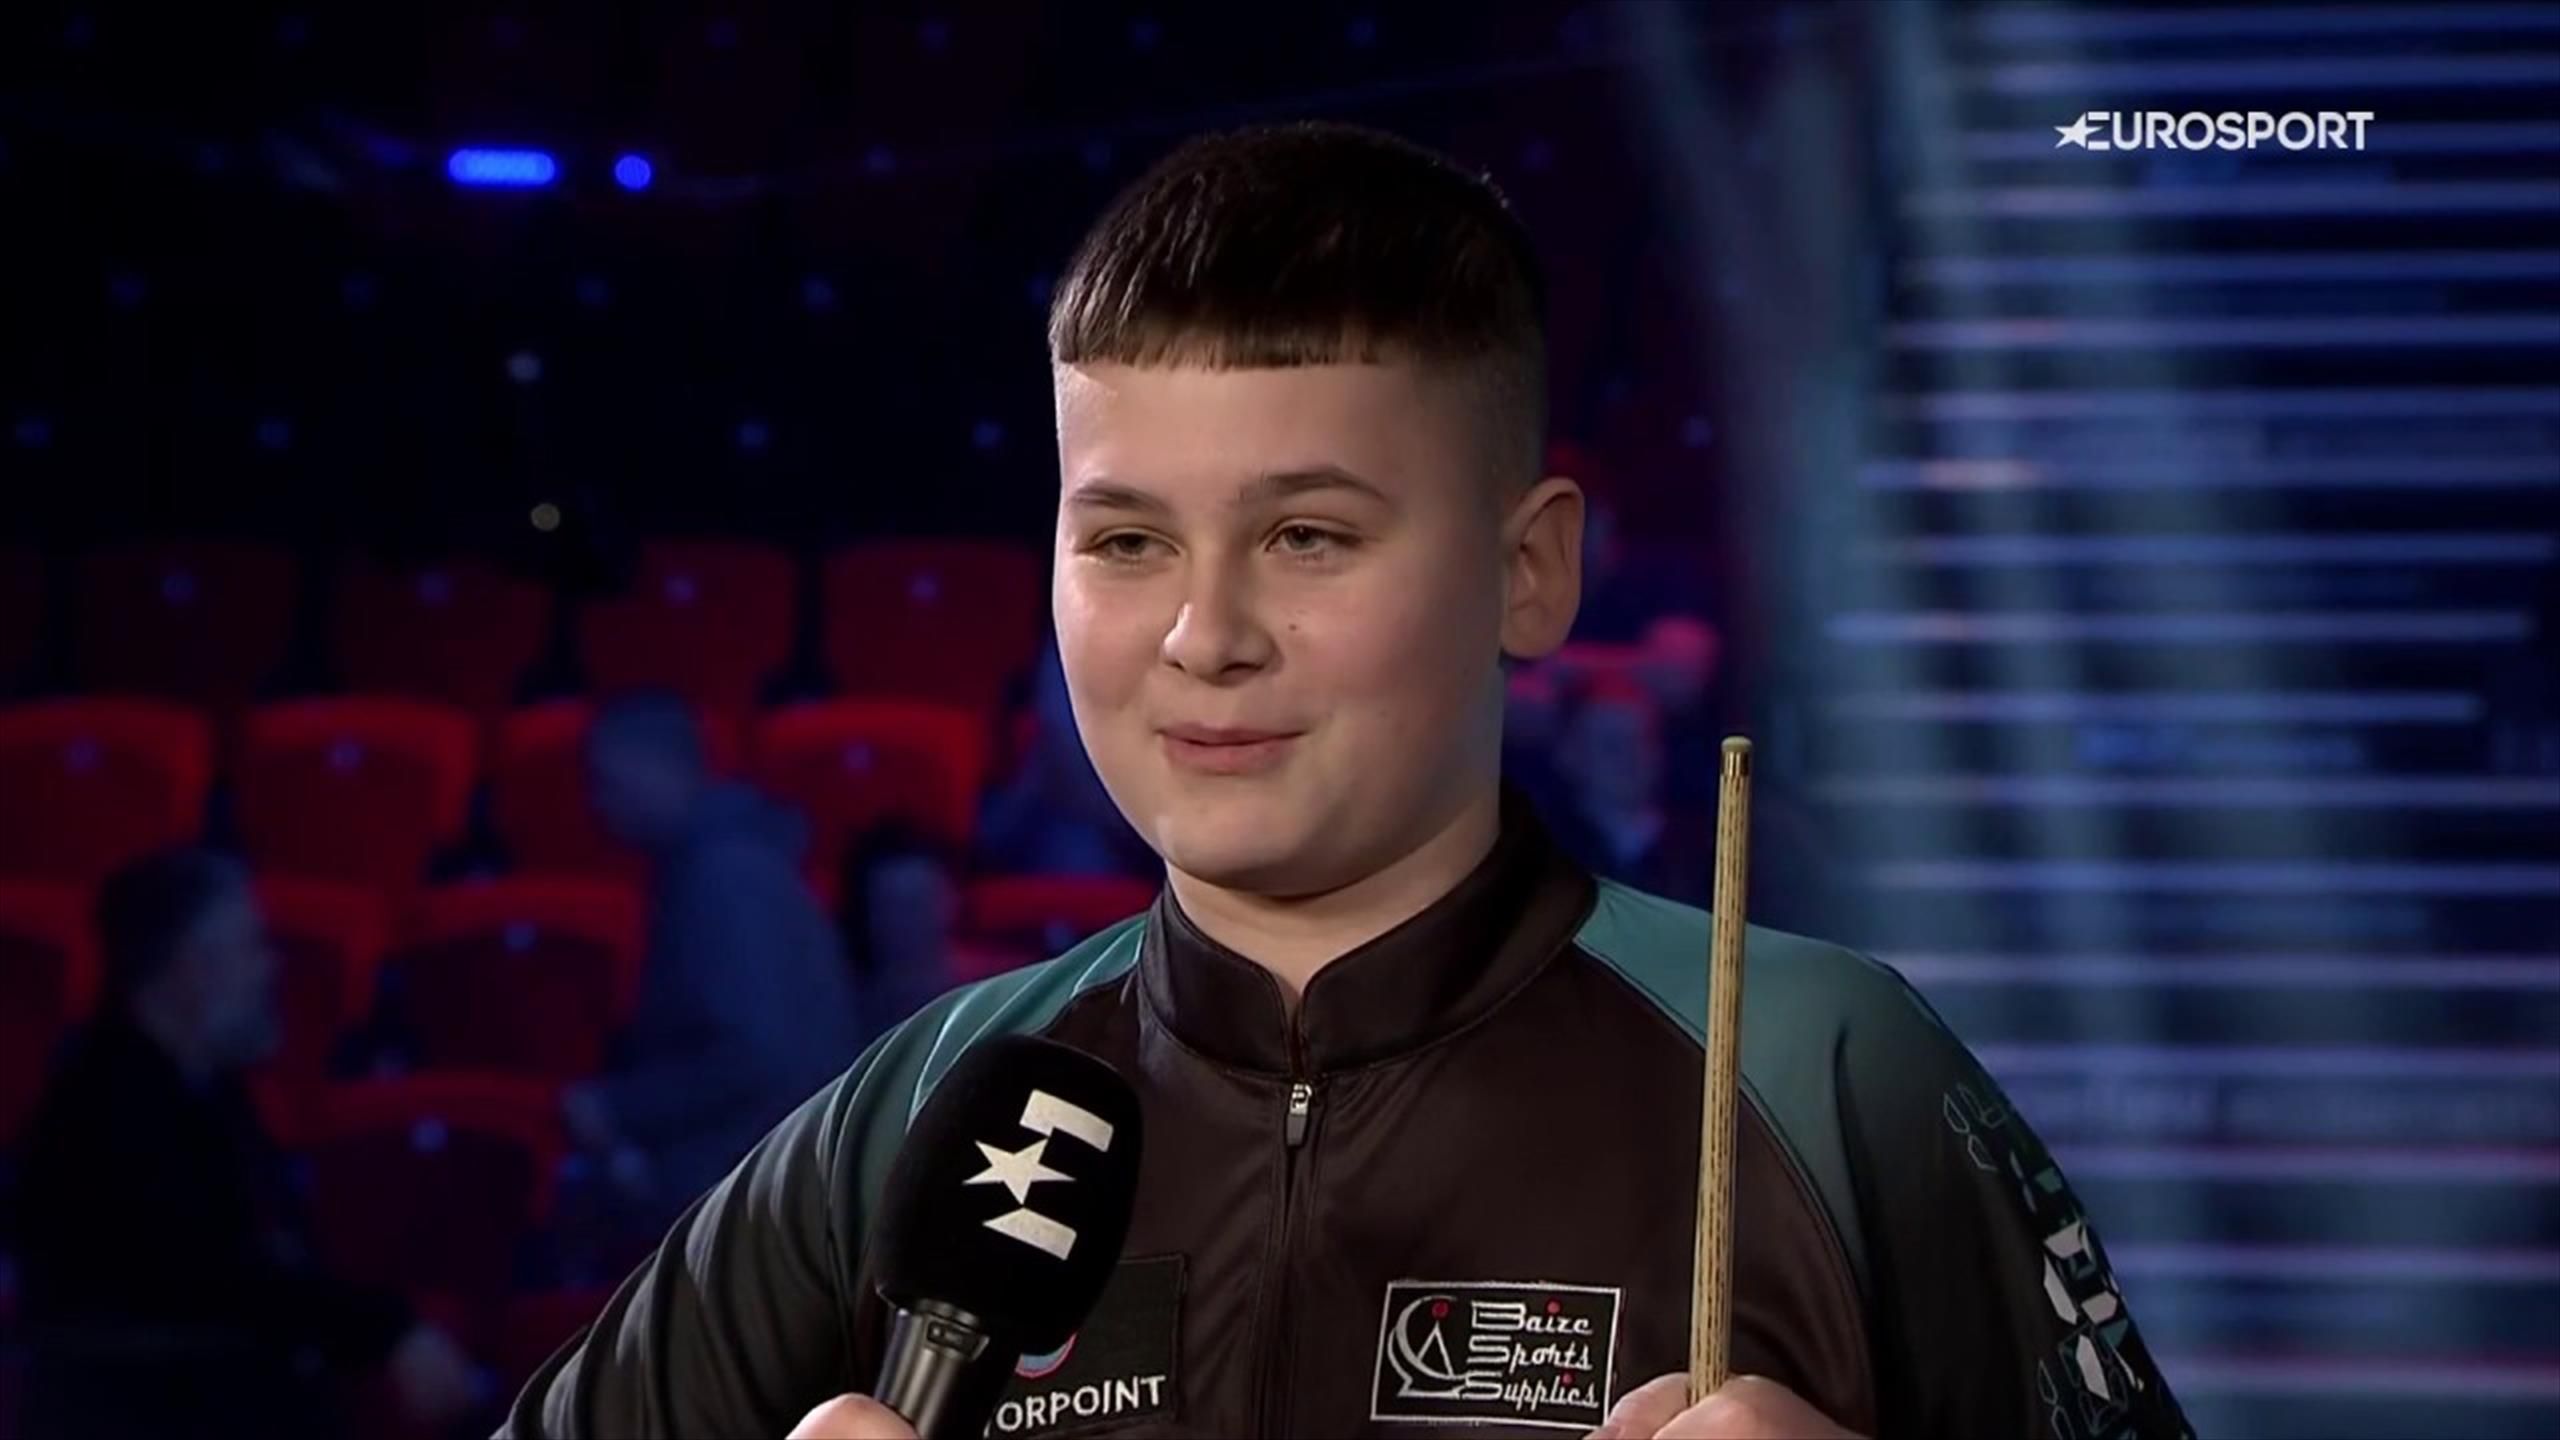 World champion - Riley Powell dreams big after Shoot Out heroics - Snooker video